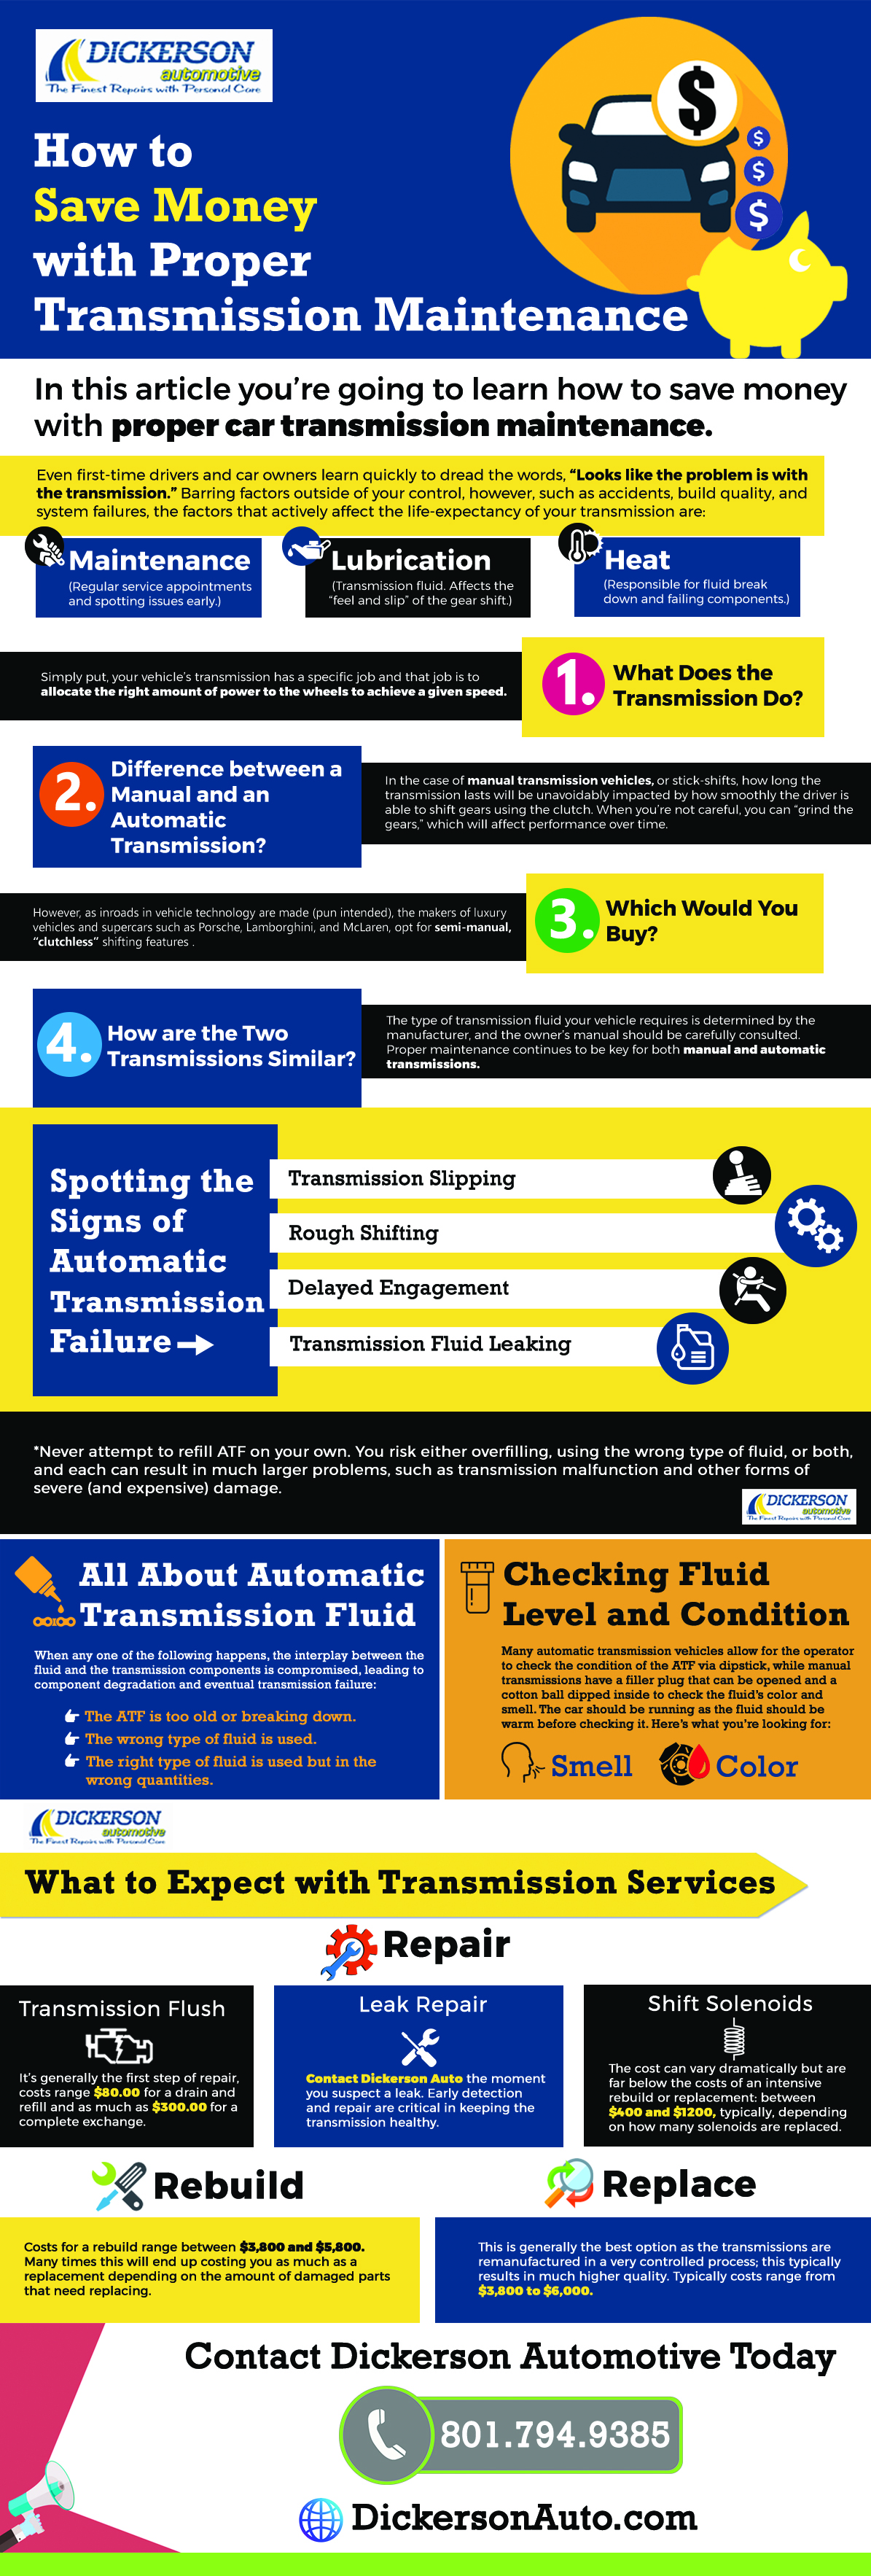 Proper Transmission Maintenance [How to Save Money] Infographic